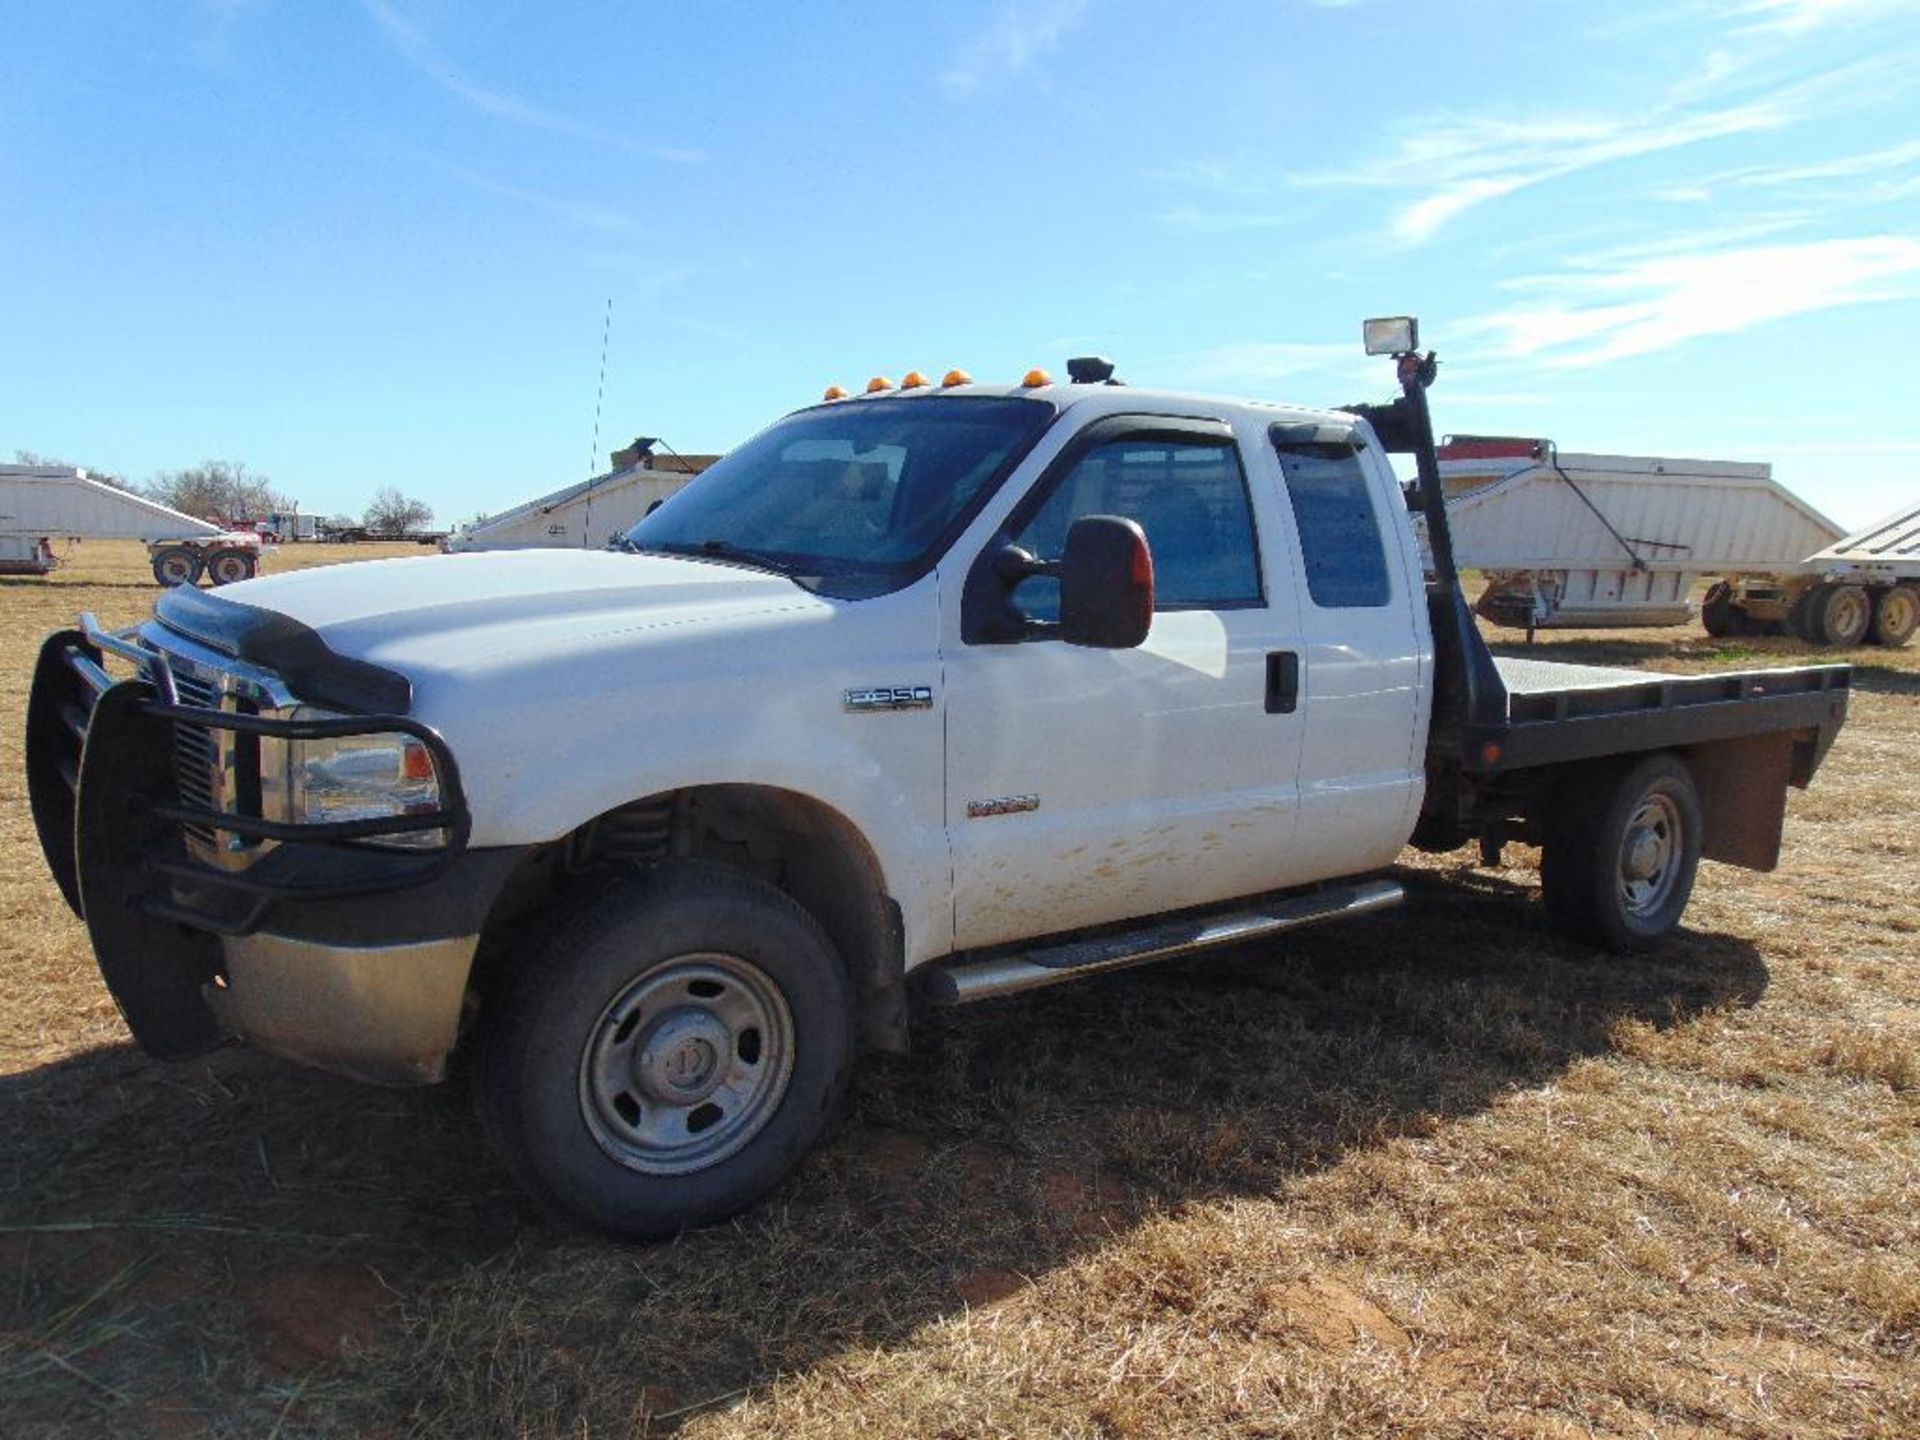 2007 Ford F350 4x4 Ext Cab Flatbed Pickup, s/n 1fdsx35p27eb36036, powerstroke eng, auto trans, od - Image 4 of 10